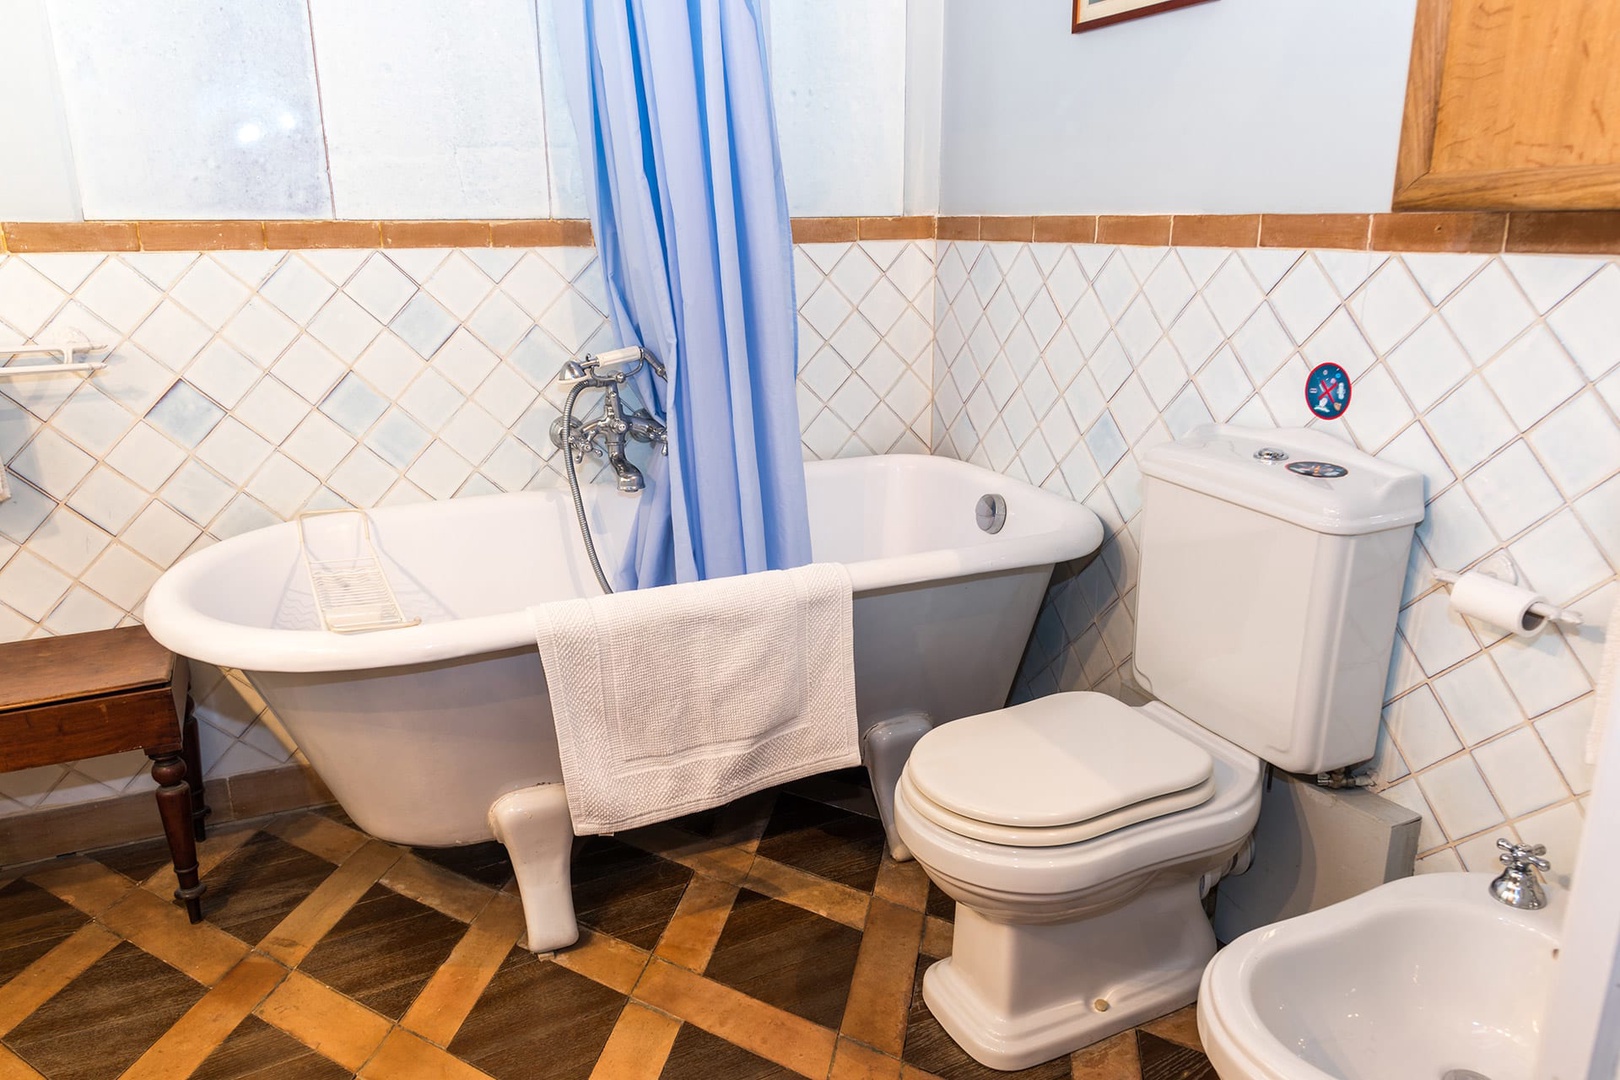 The bathroom has a bathtub fitted with a handheld showerhead, toilet and bidet.